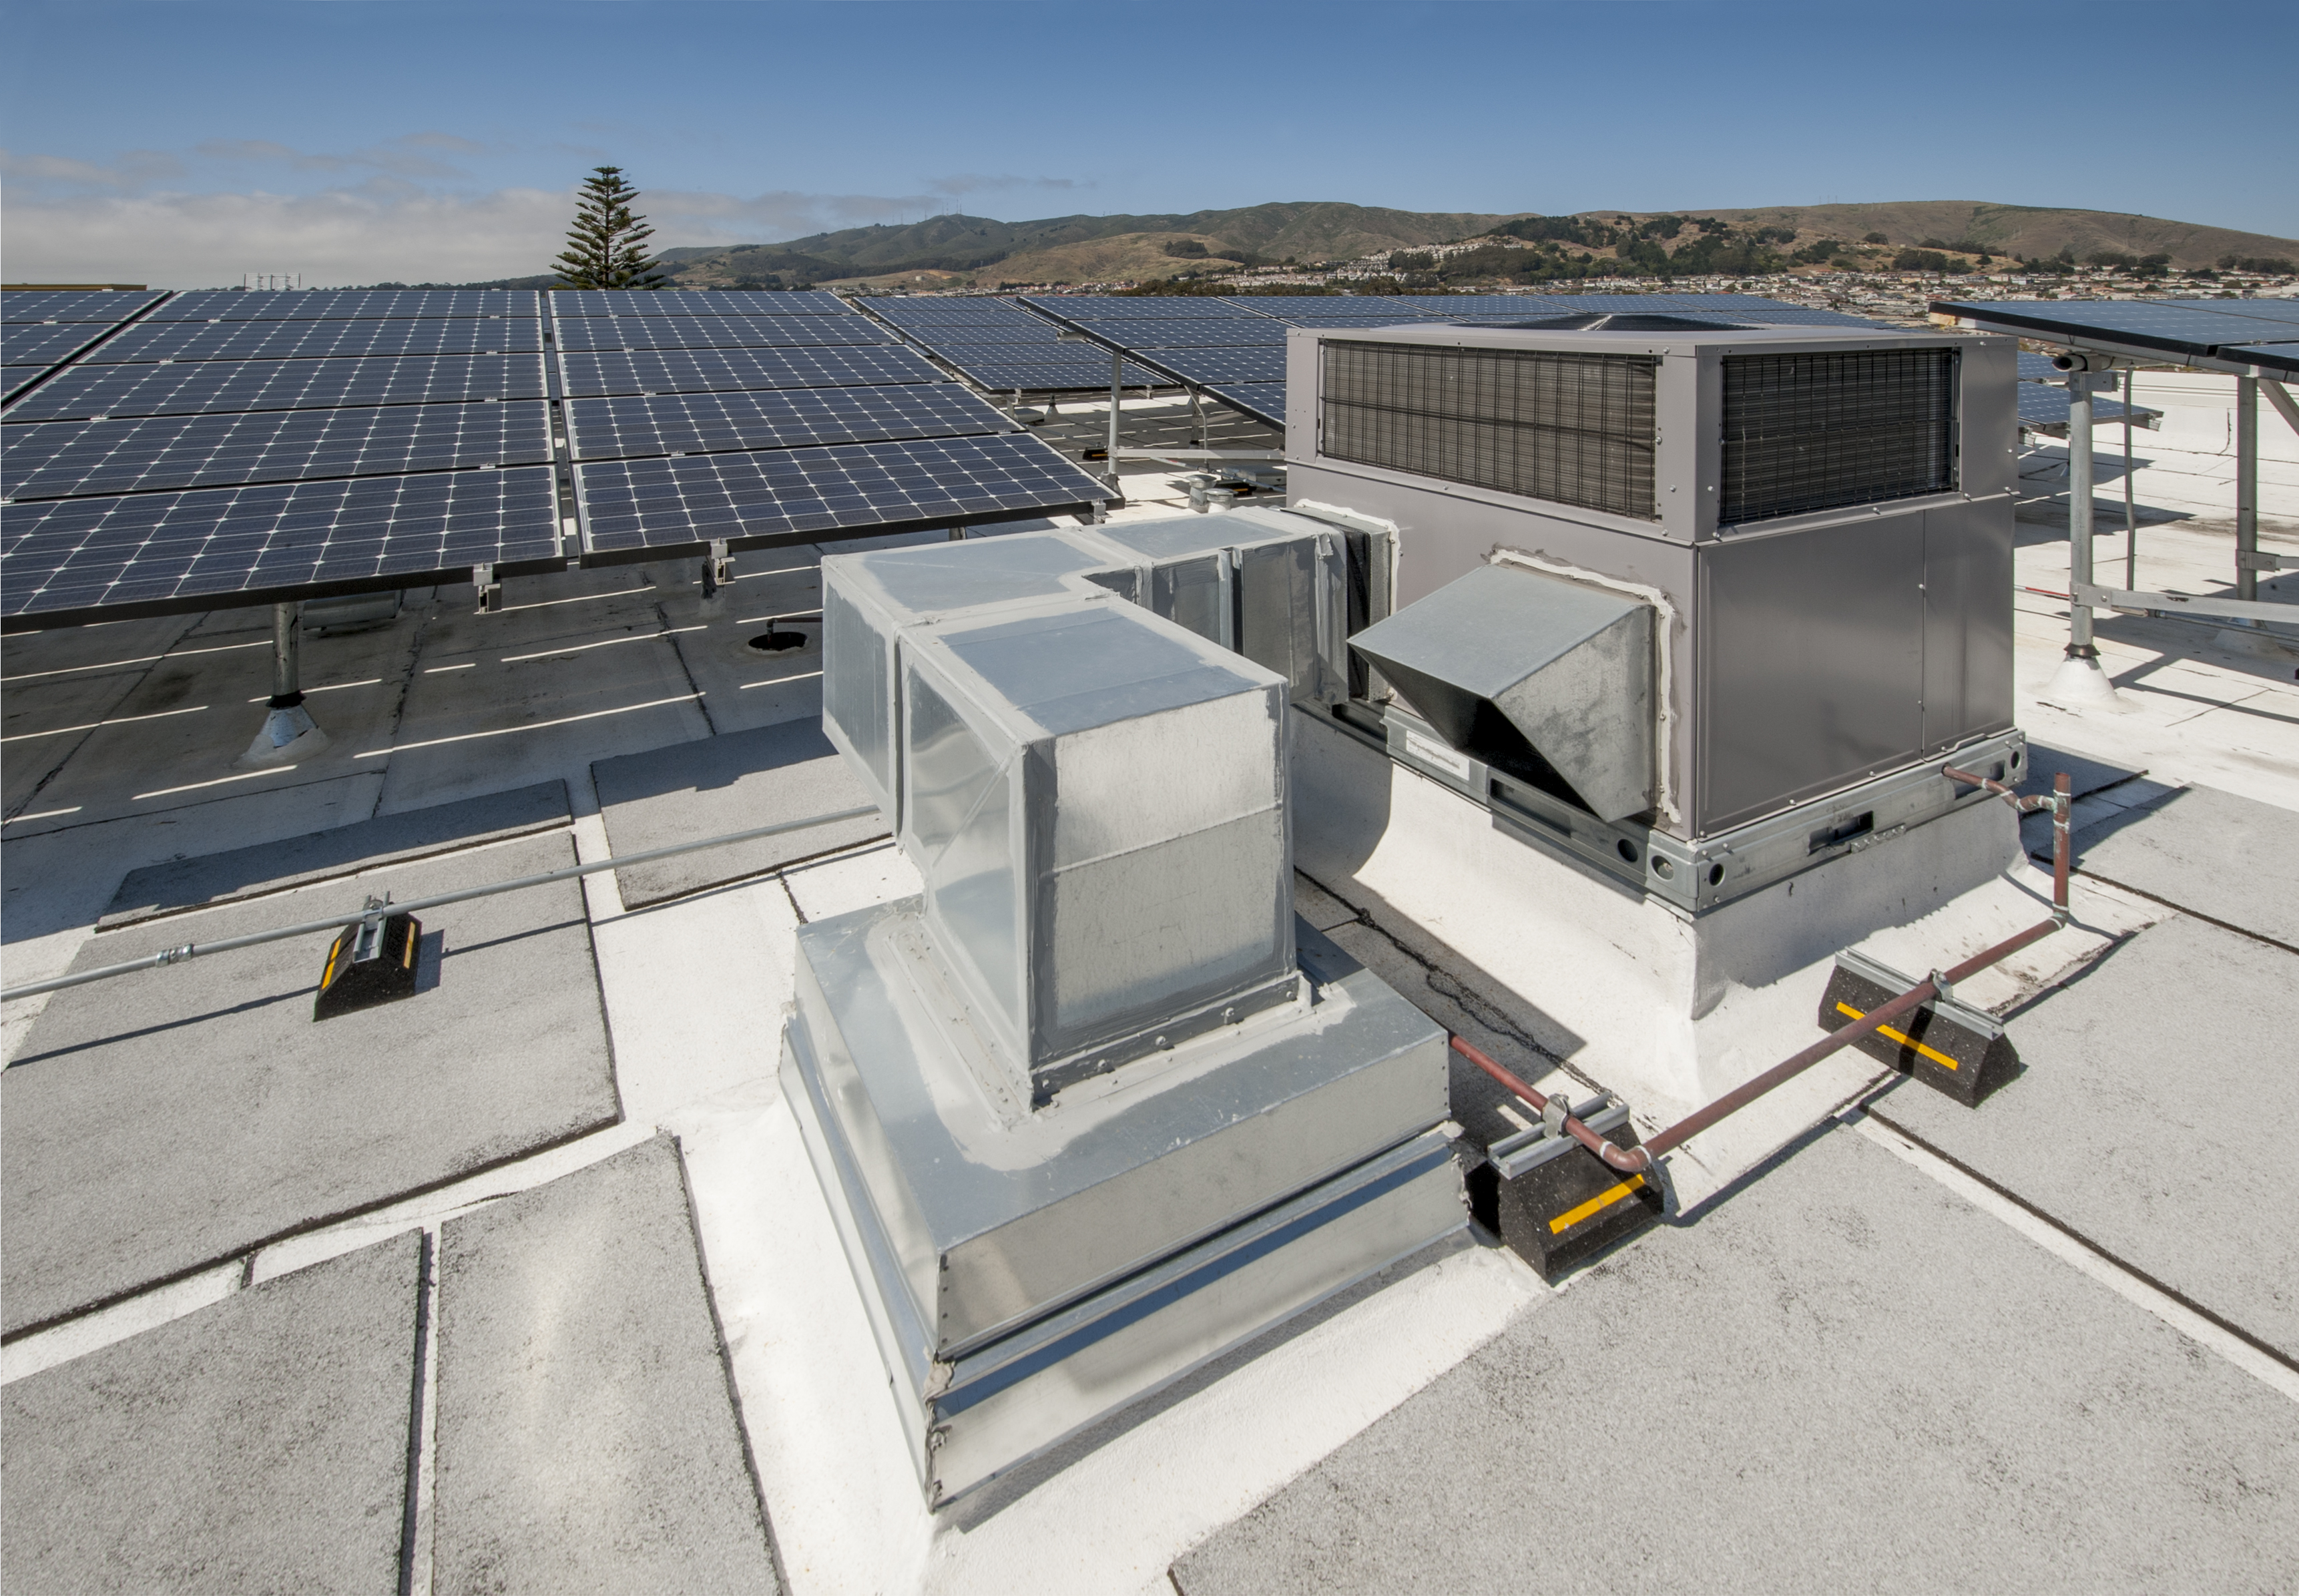 Sustainable Construction: 5 Ways to Make Greener HVAC Systems